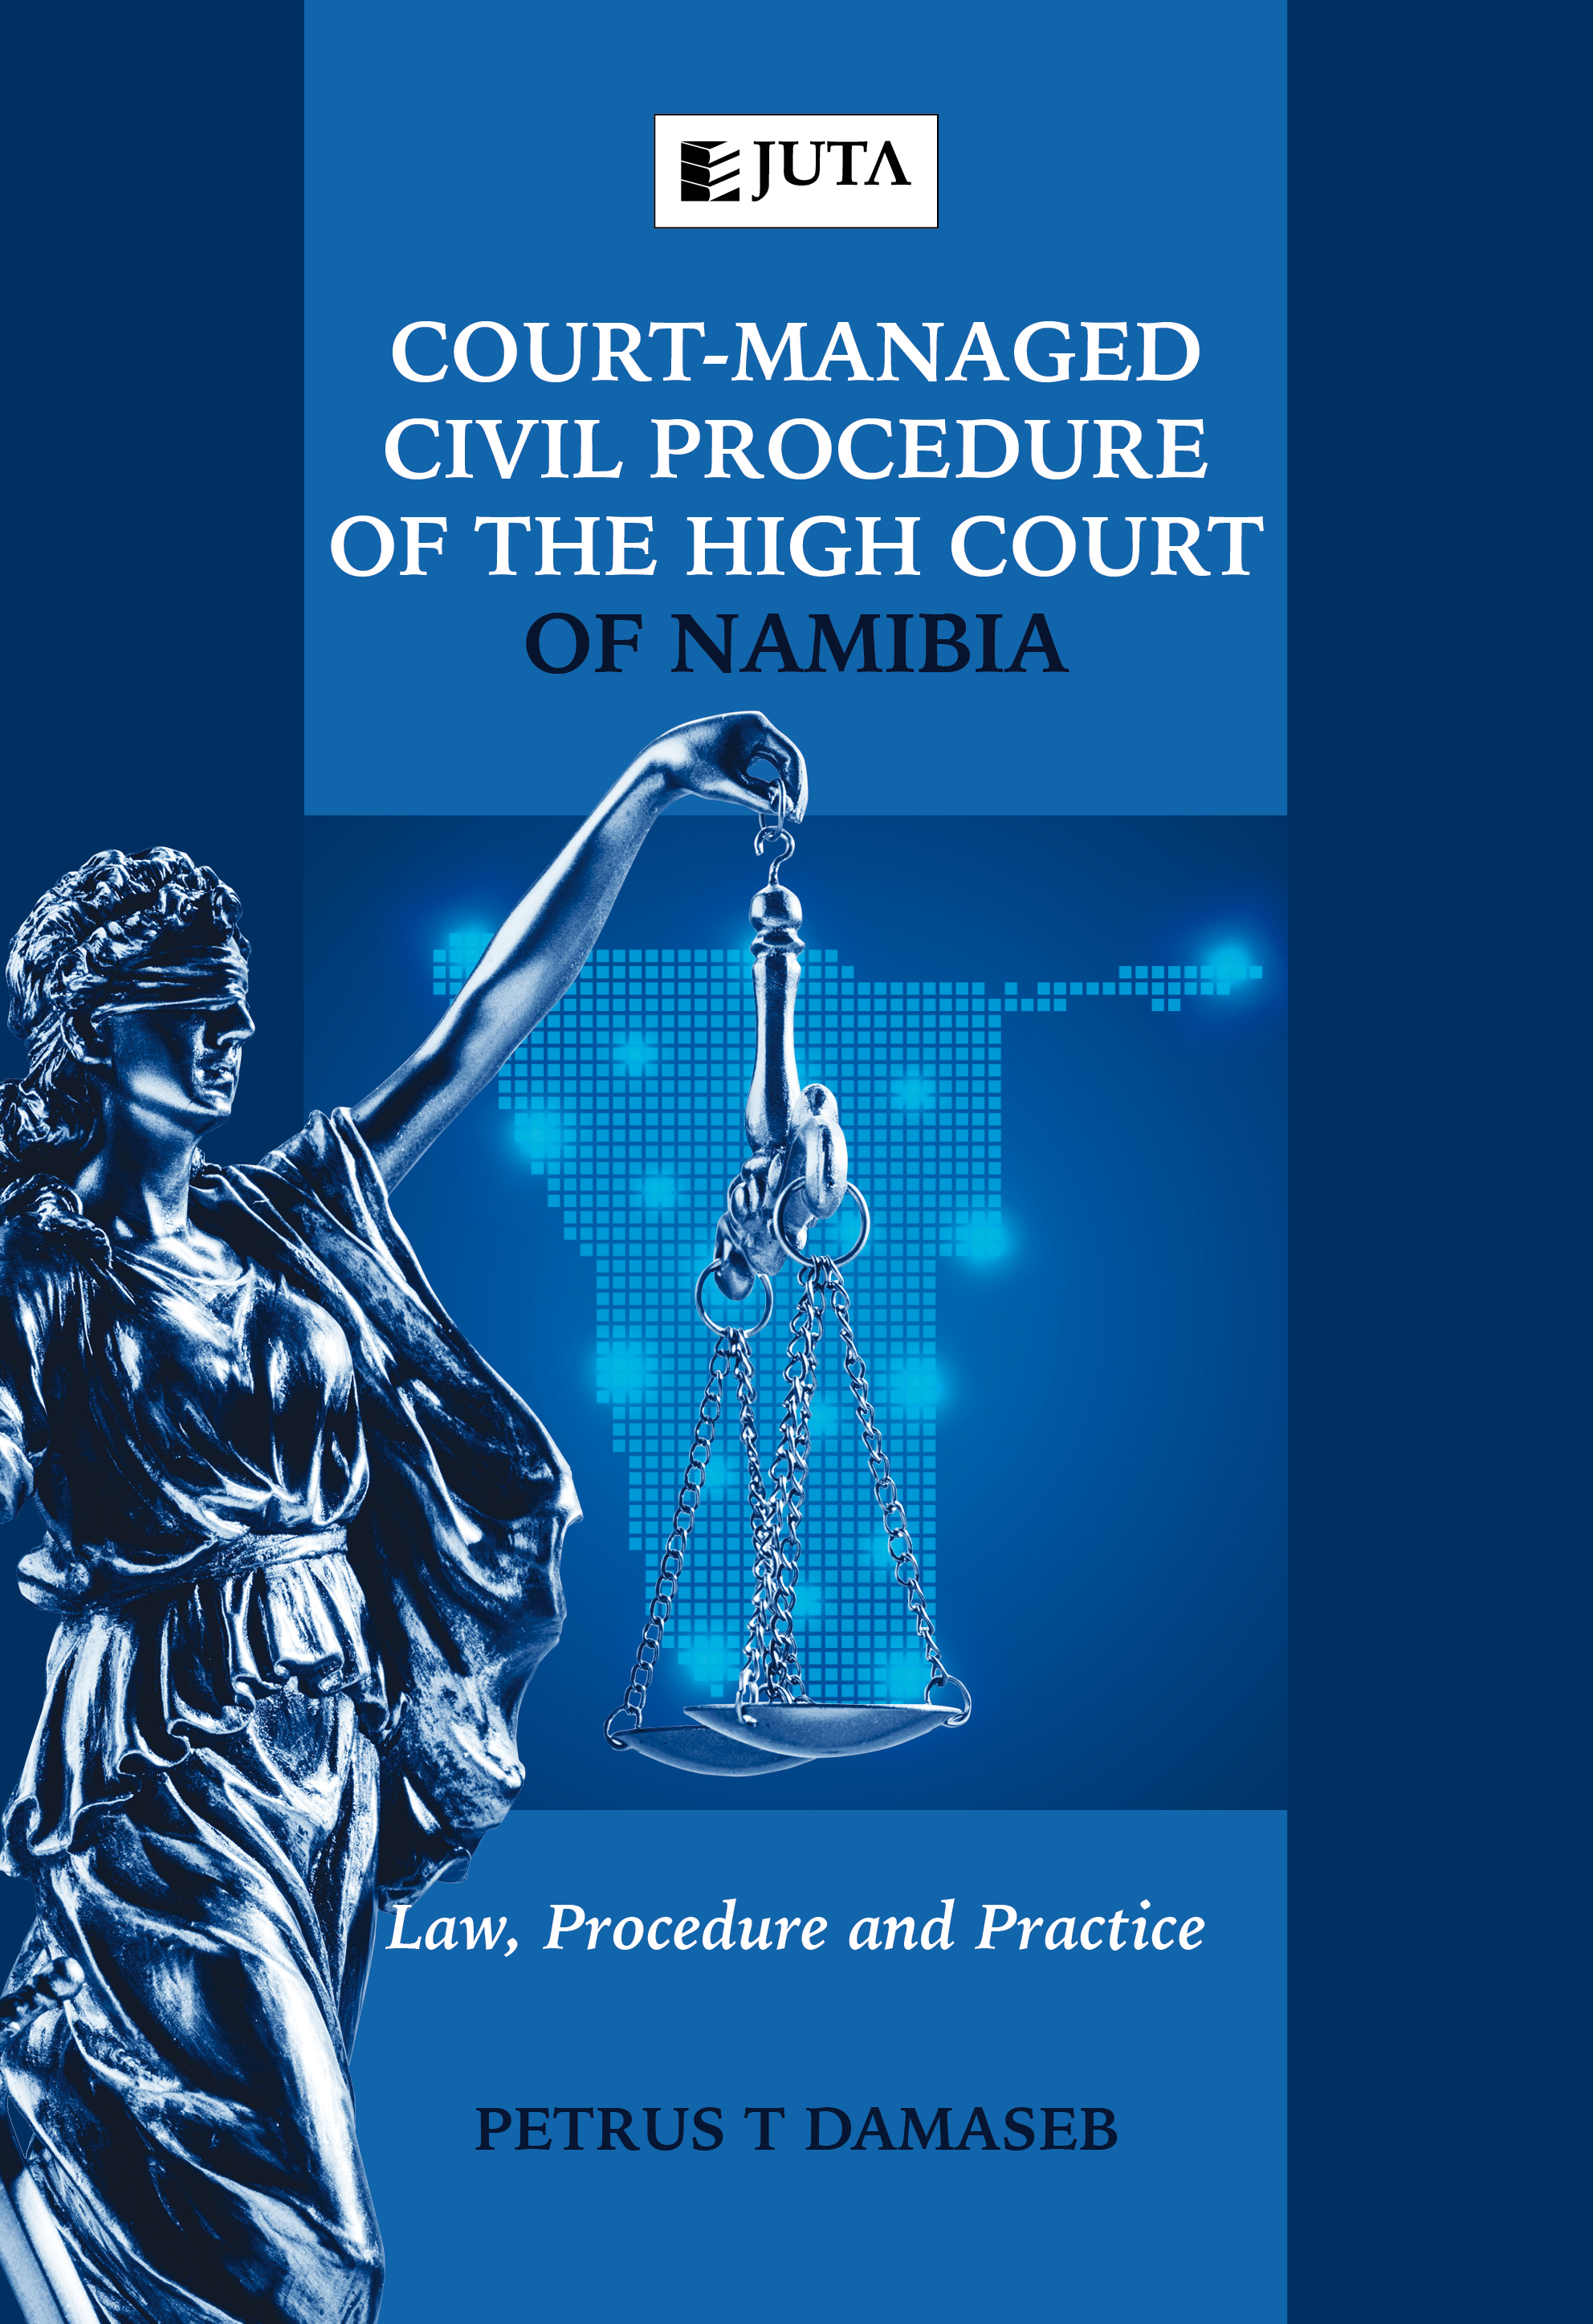 Court-Managed Civil Procedure of the High Court of Namibia